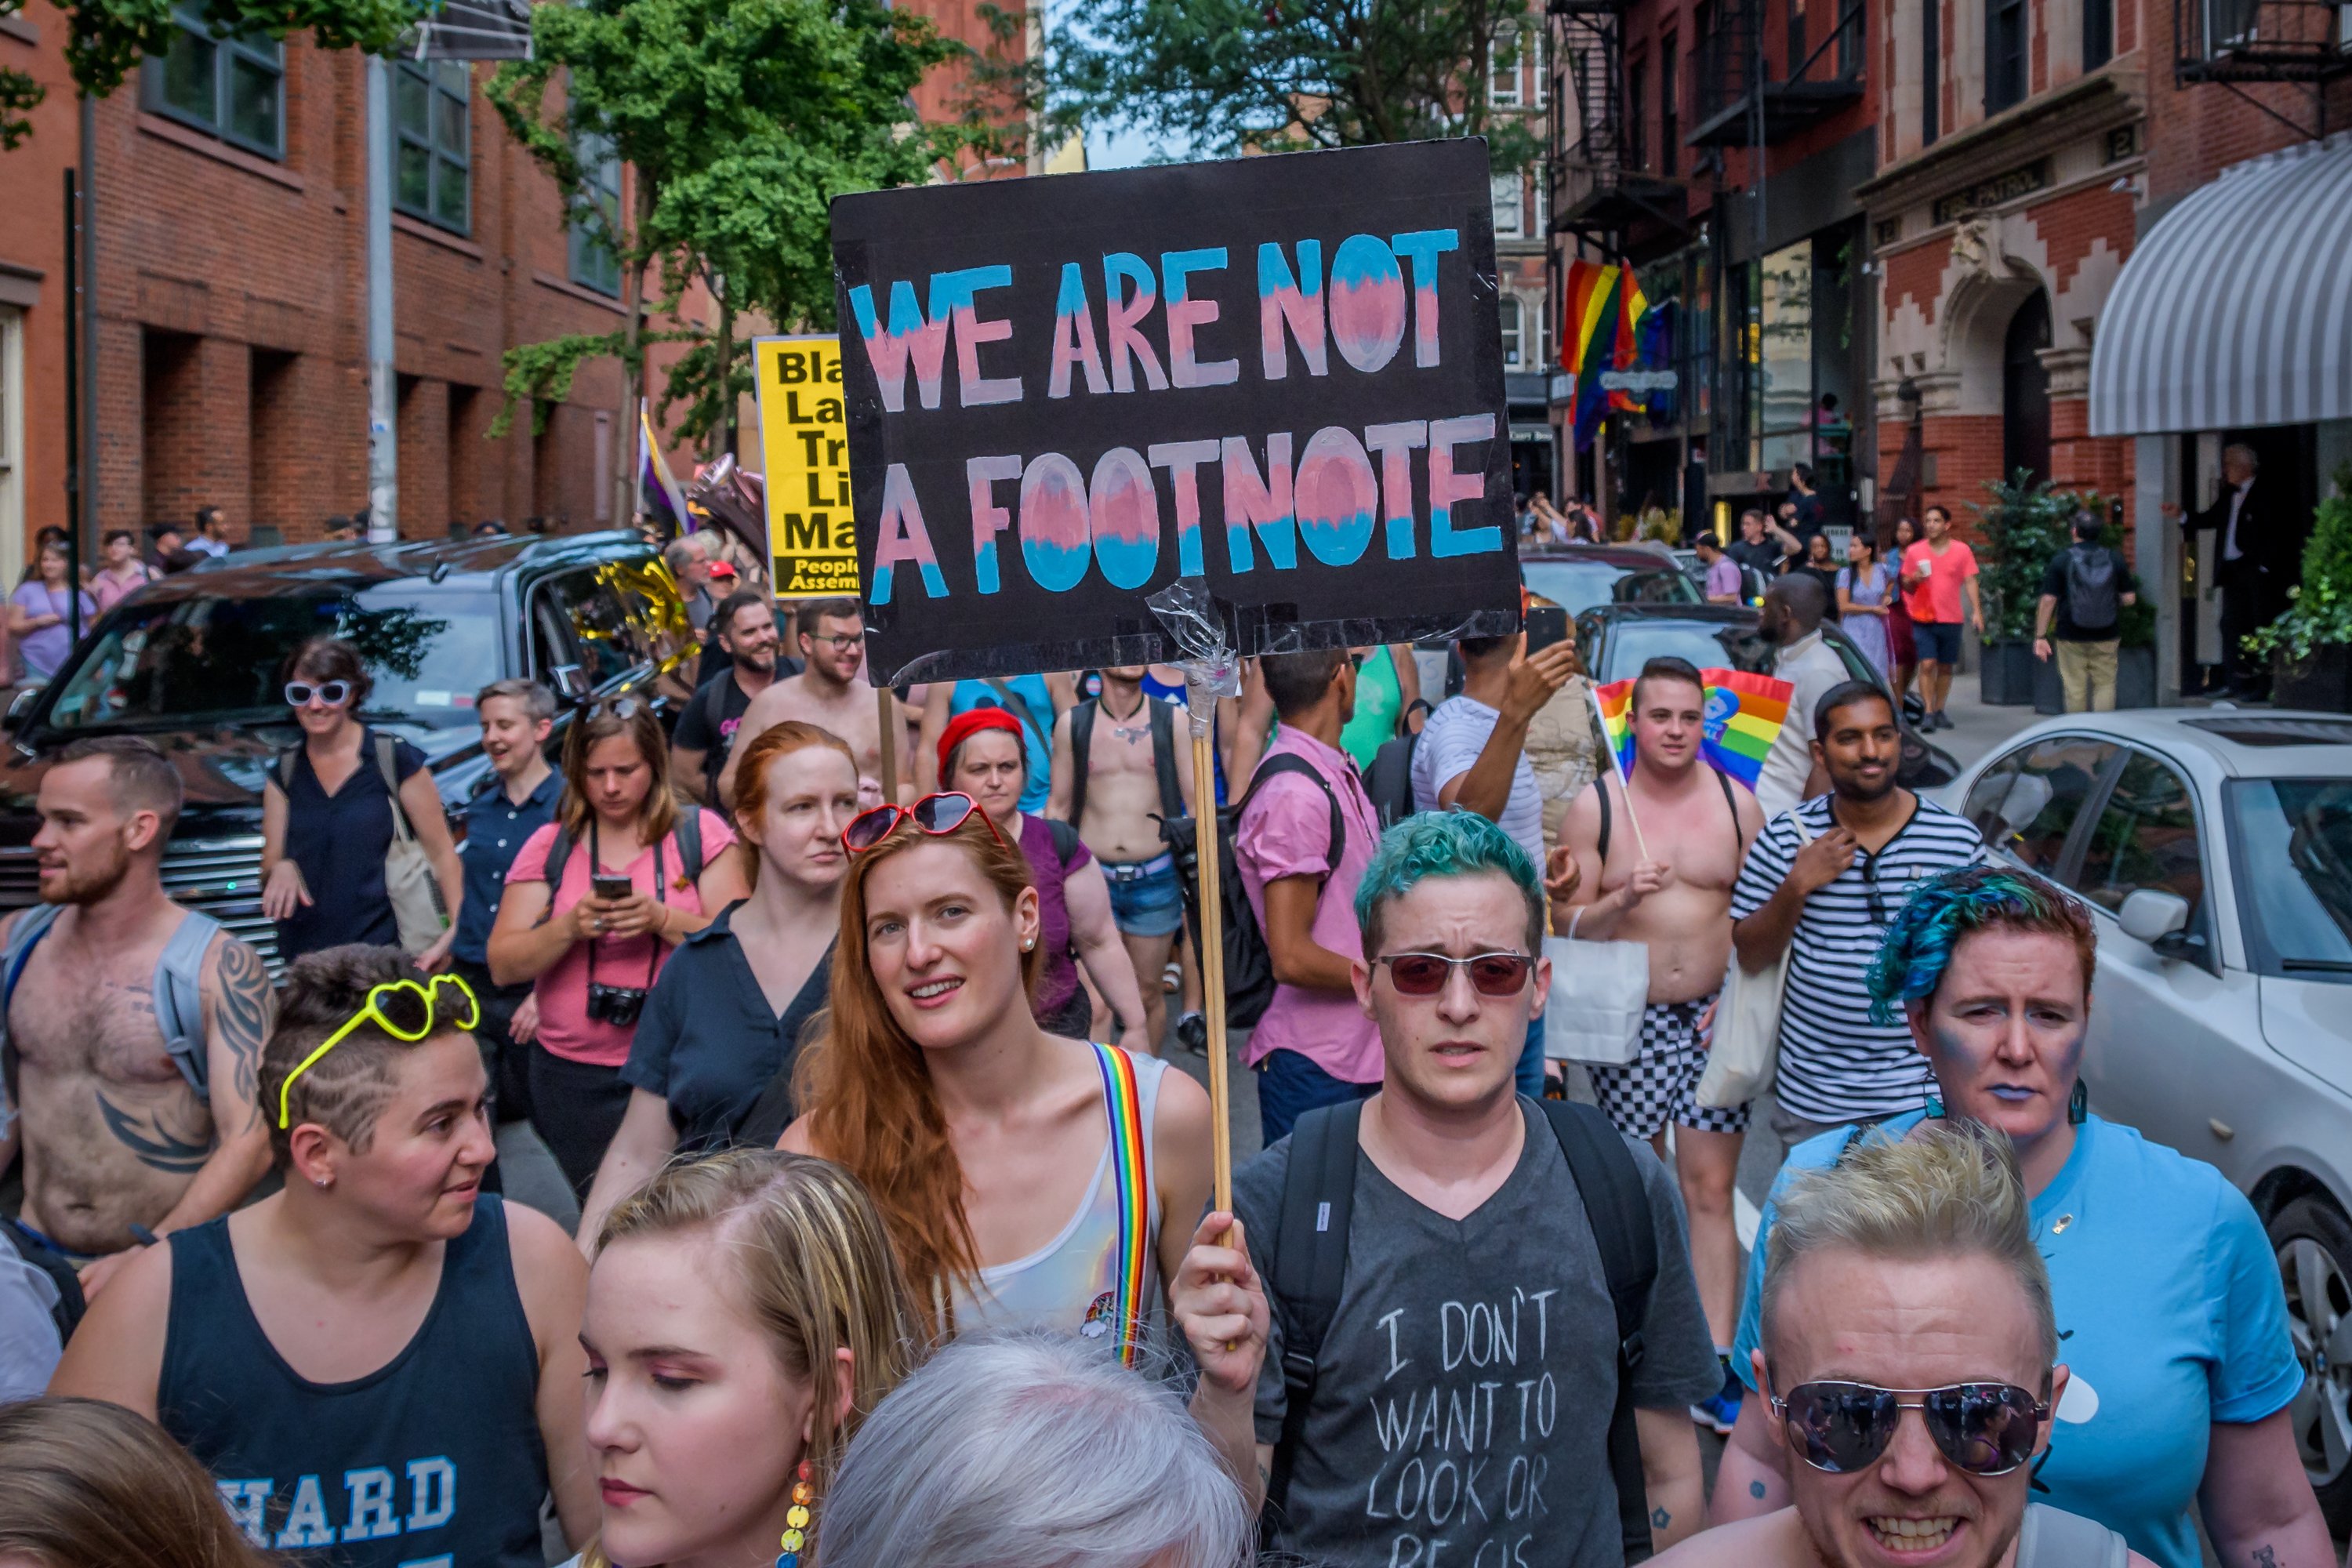 Image of a large group of diverse people marching on a city street holding LGBTQ+ allyship signs including one that says "WE ARE NOT A FOOTNOTE" in pink, blue, and white.